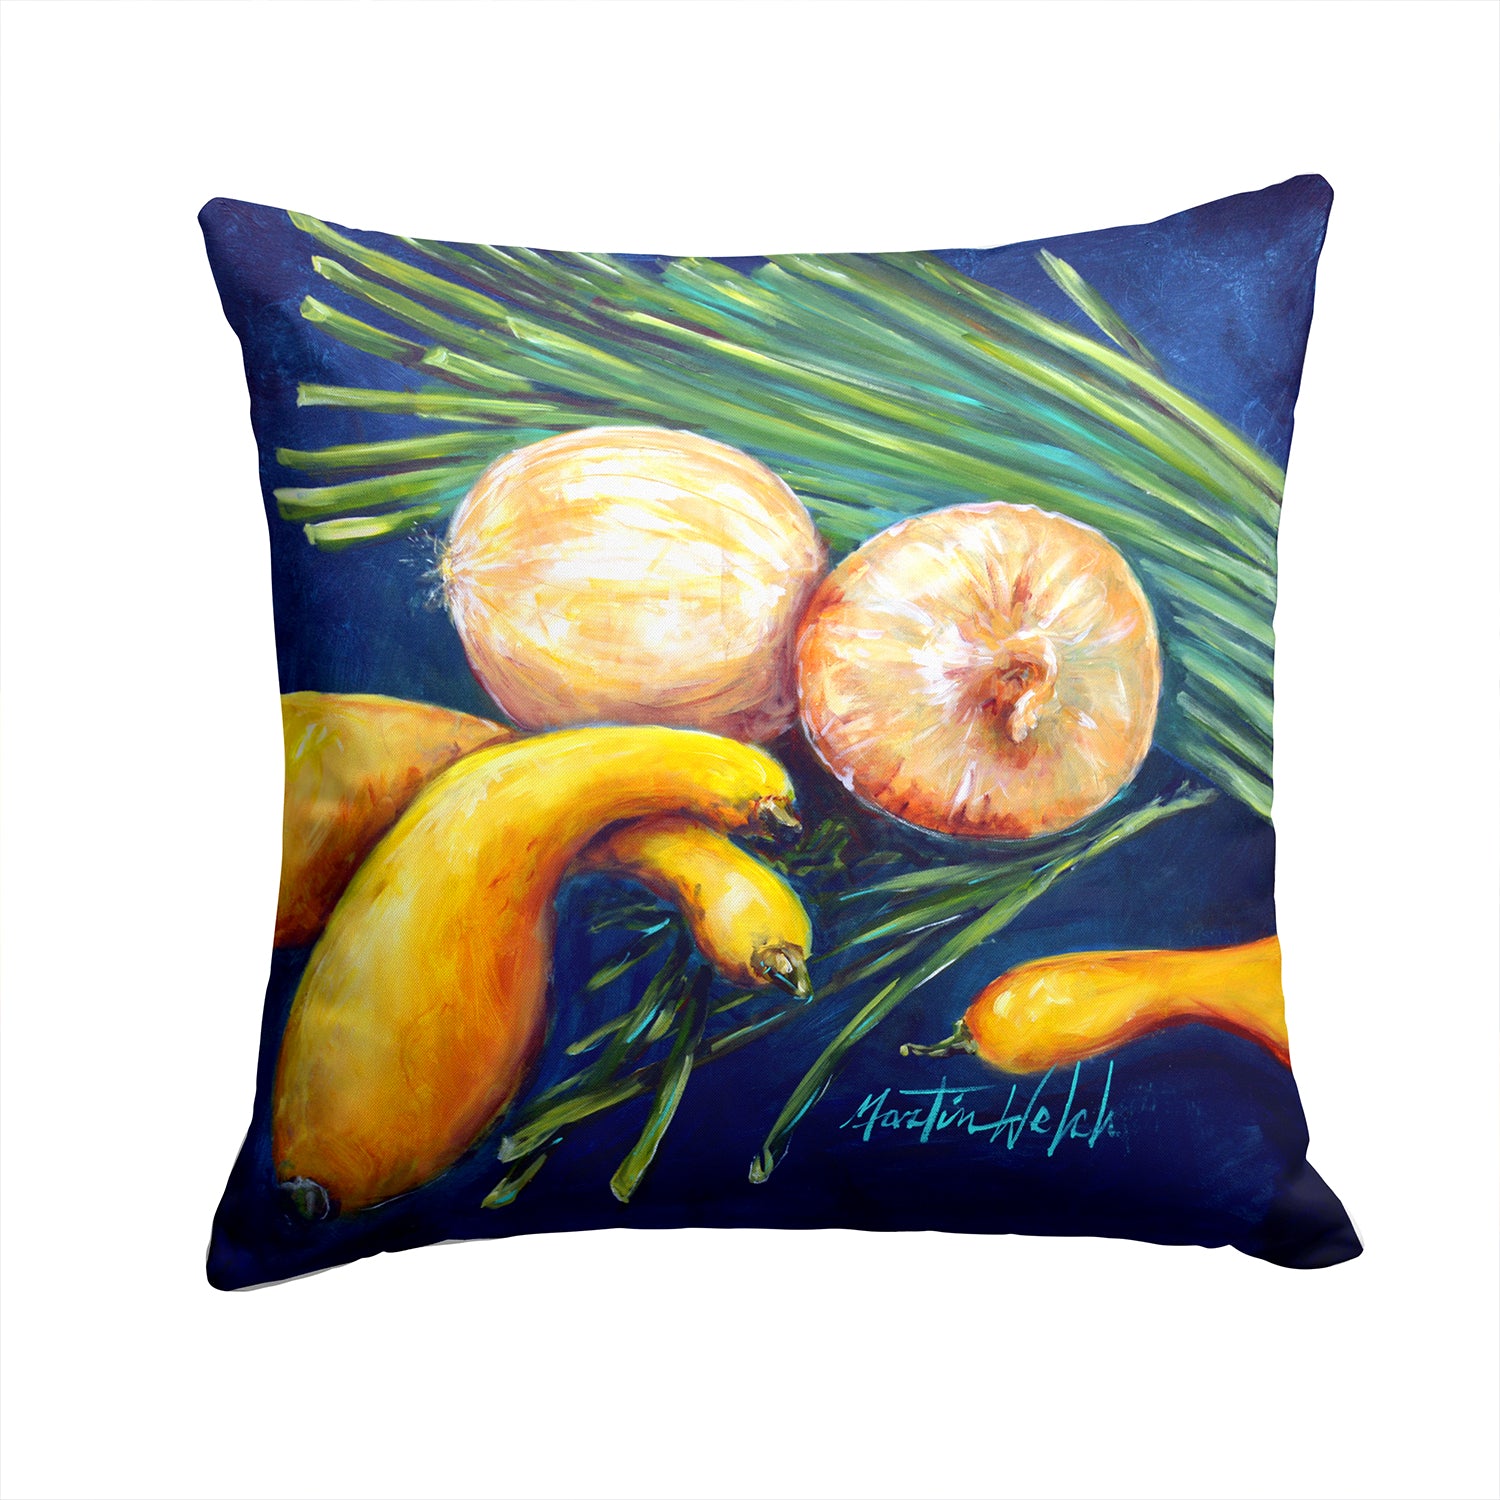 Buy this Crooked Neck Squash Fabric Decorative Pillow